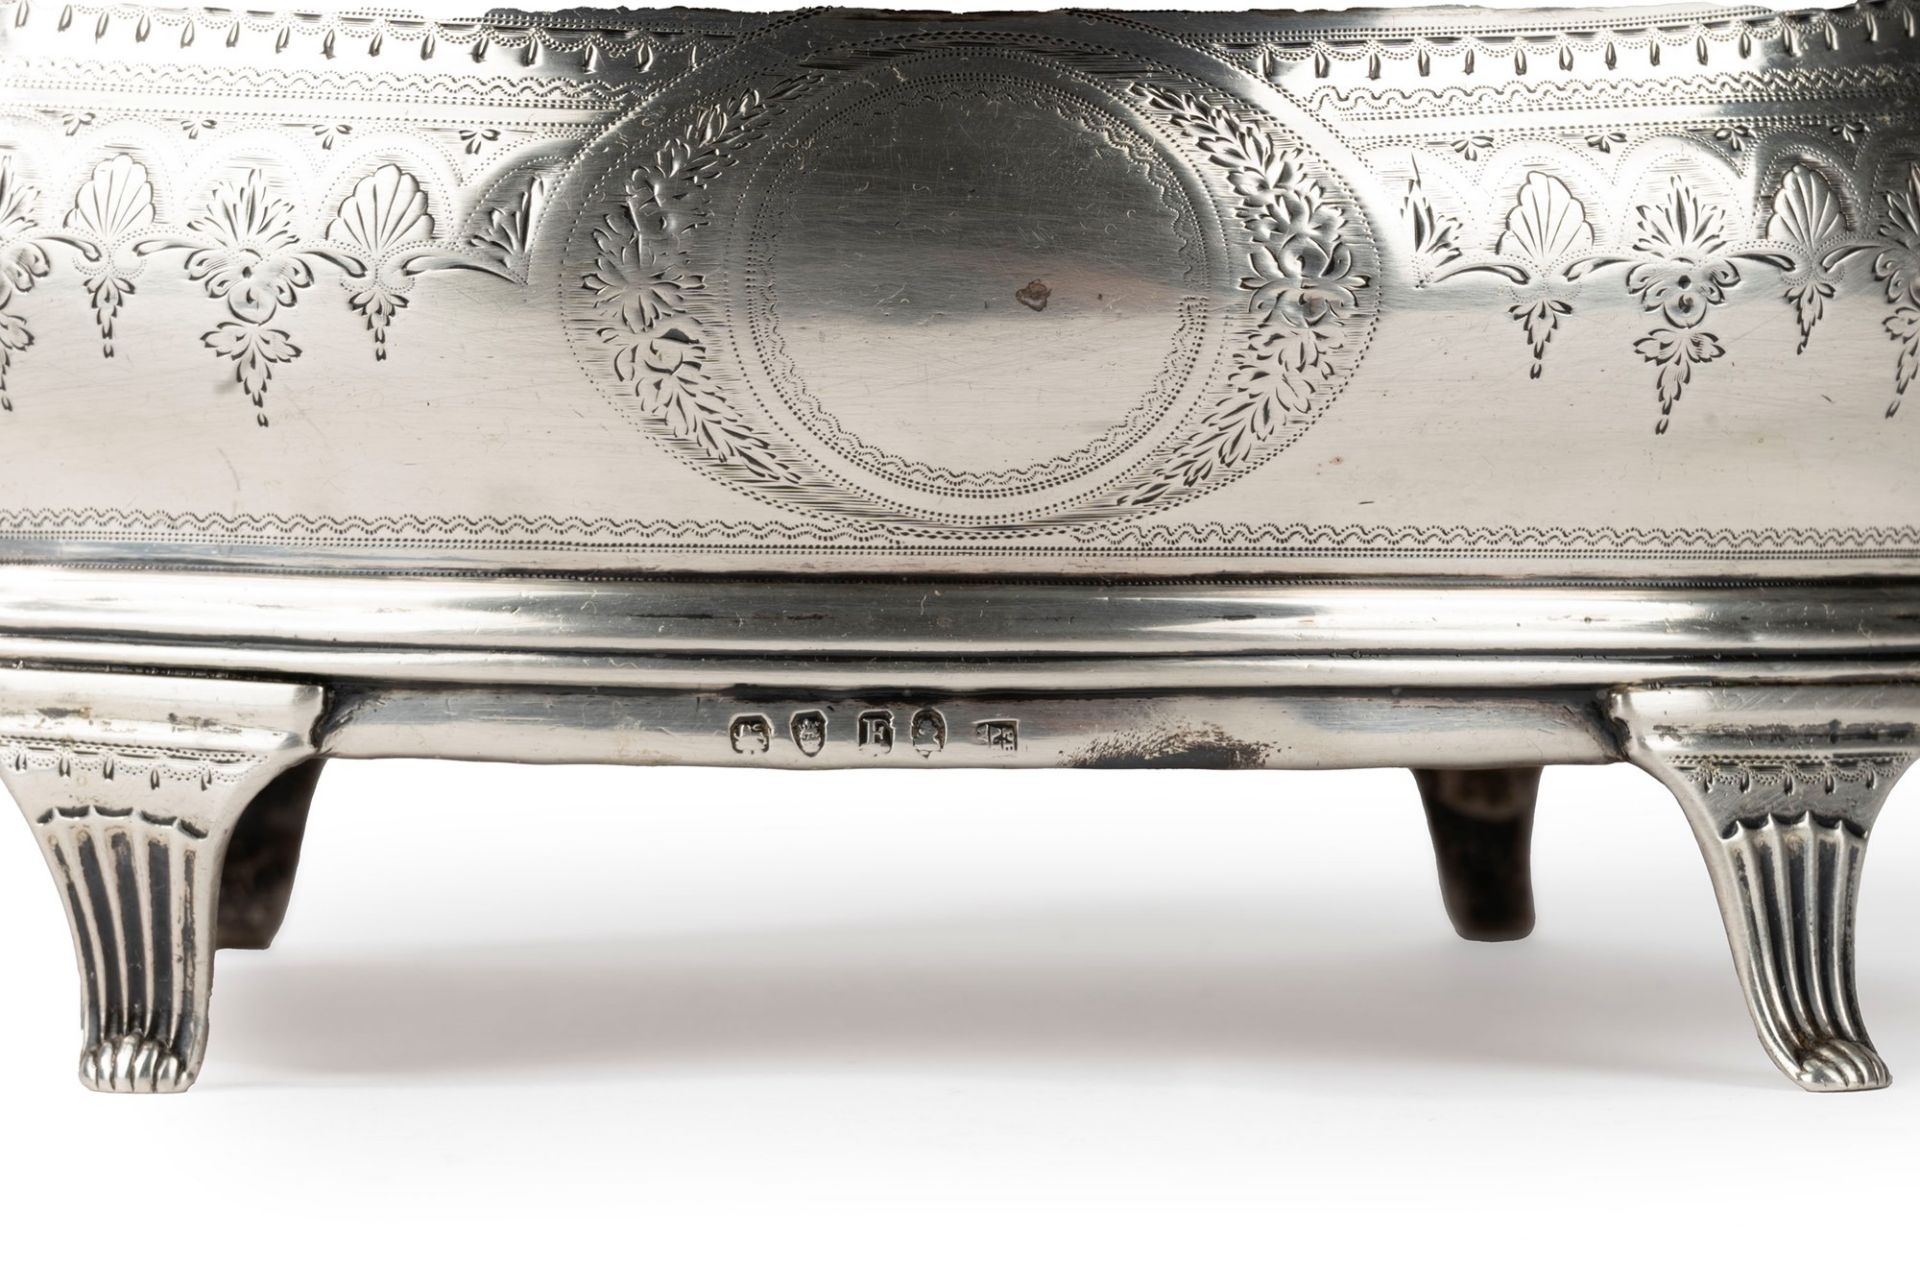 Centerpiece in silver and wood, London, England, early 19th century - Bild 3 aus 3